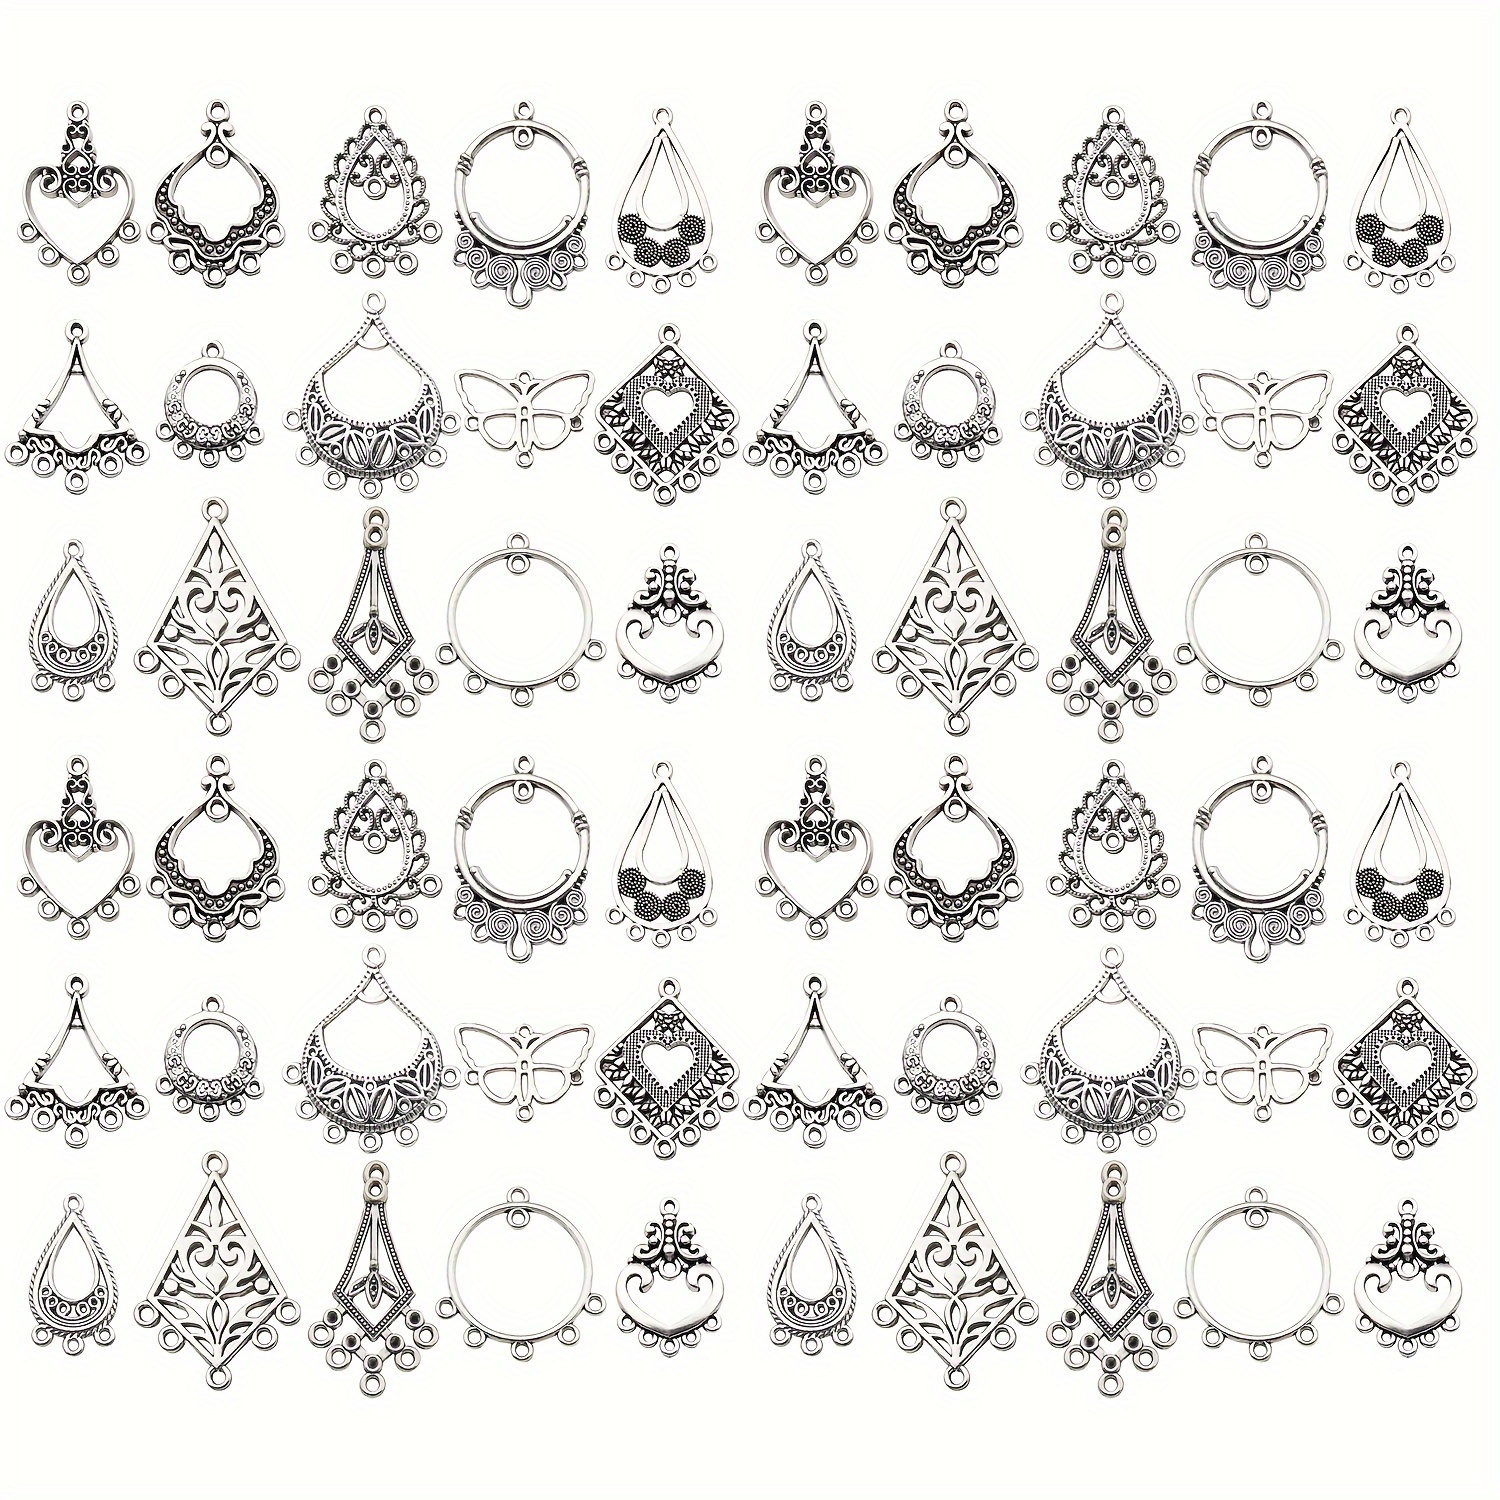 

60pcs Tibetan Antique Silver Alloy Chandelier Earring Connectors - Assorted 15 Styles Jewelry Making Charms For Necklaces And Pendants